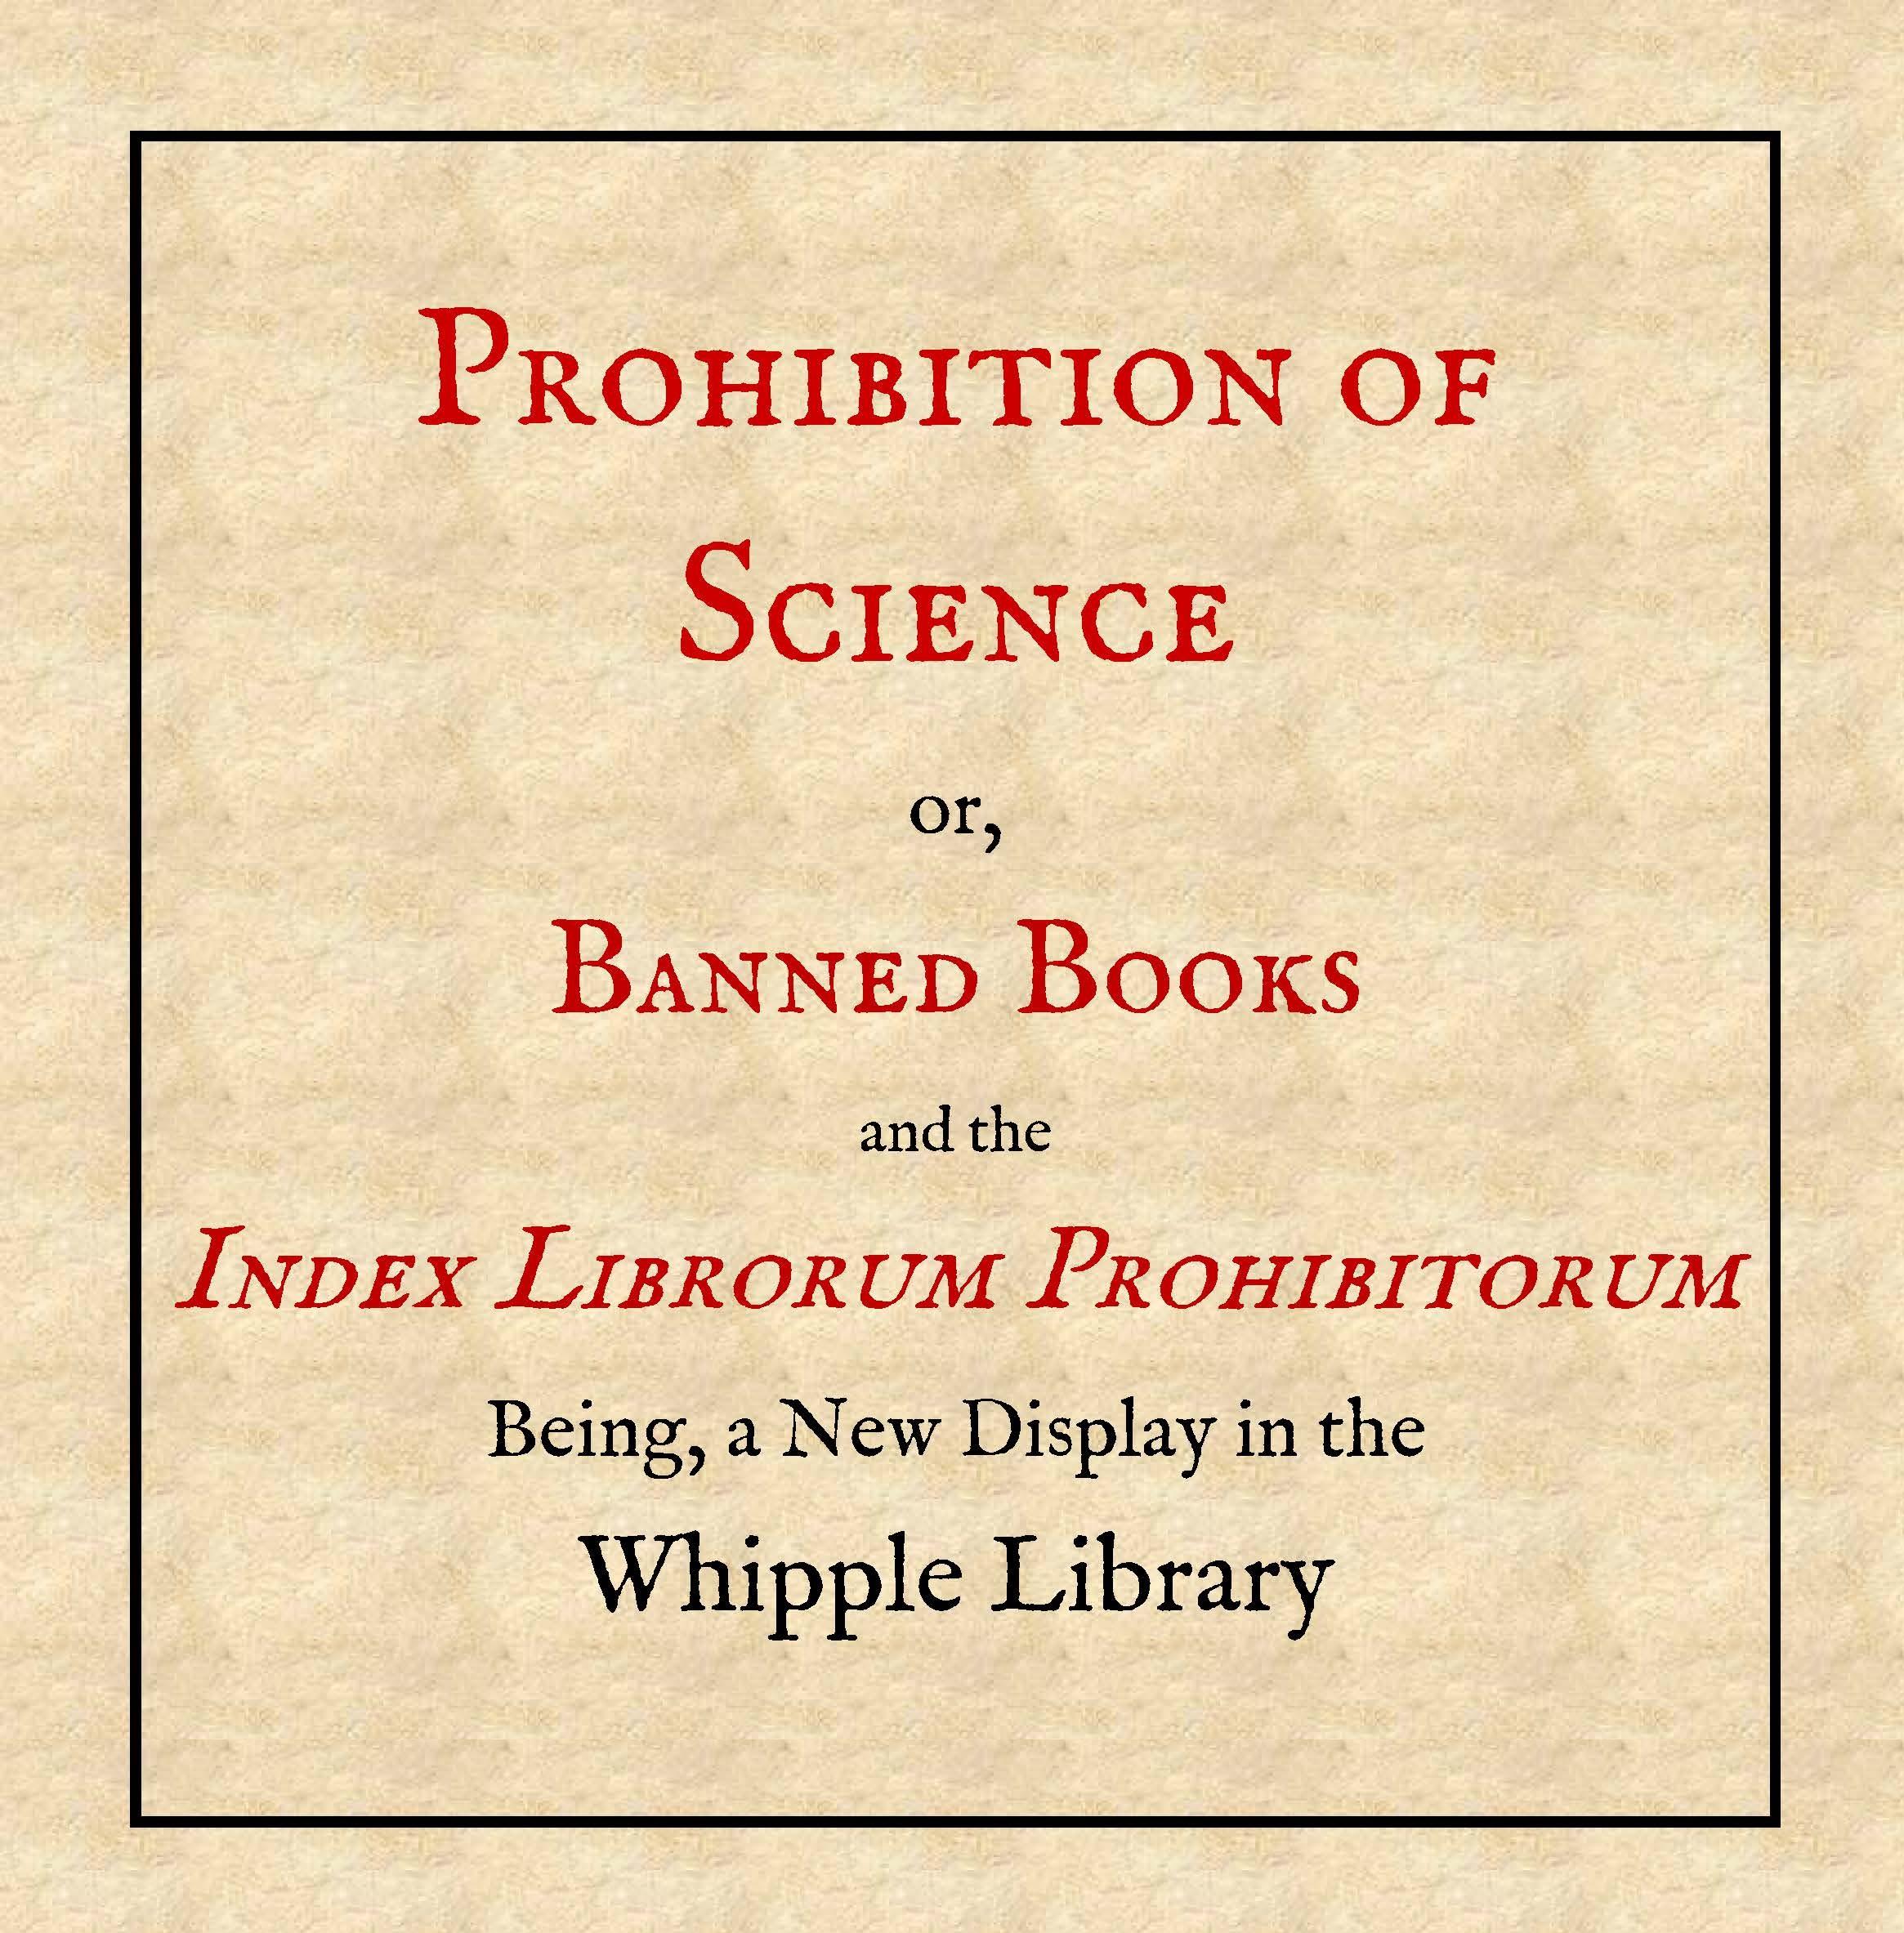 Prohibition of Science: or, Banned Books and the Index Librorum Prohibitorum. Being a New Display in the Whipple Library